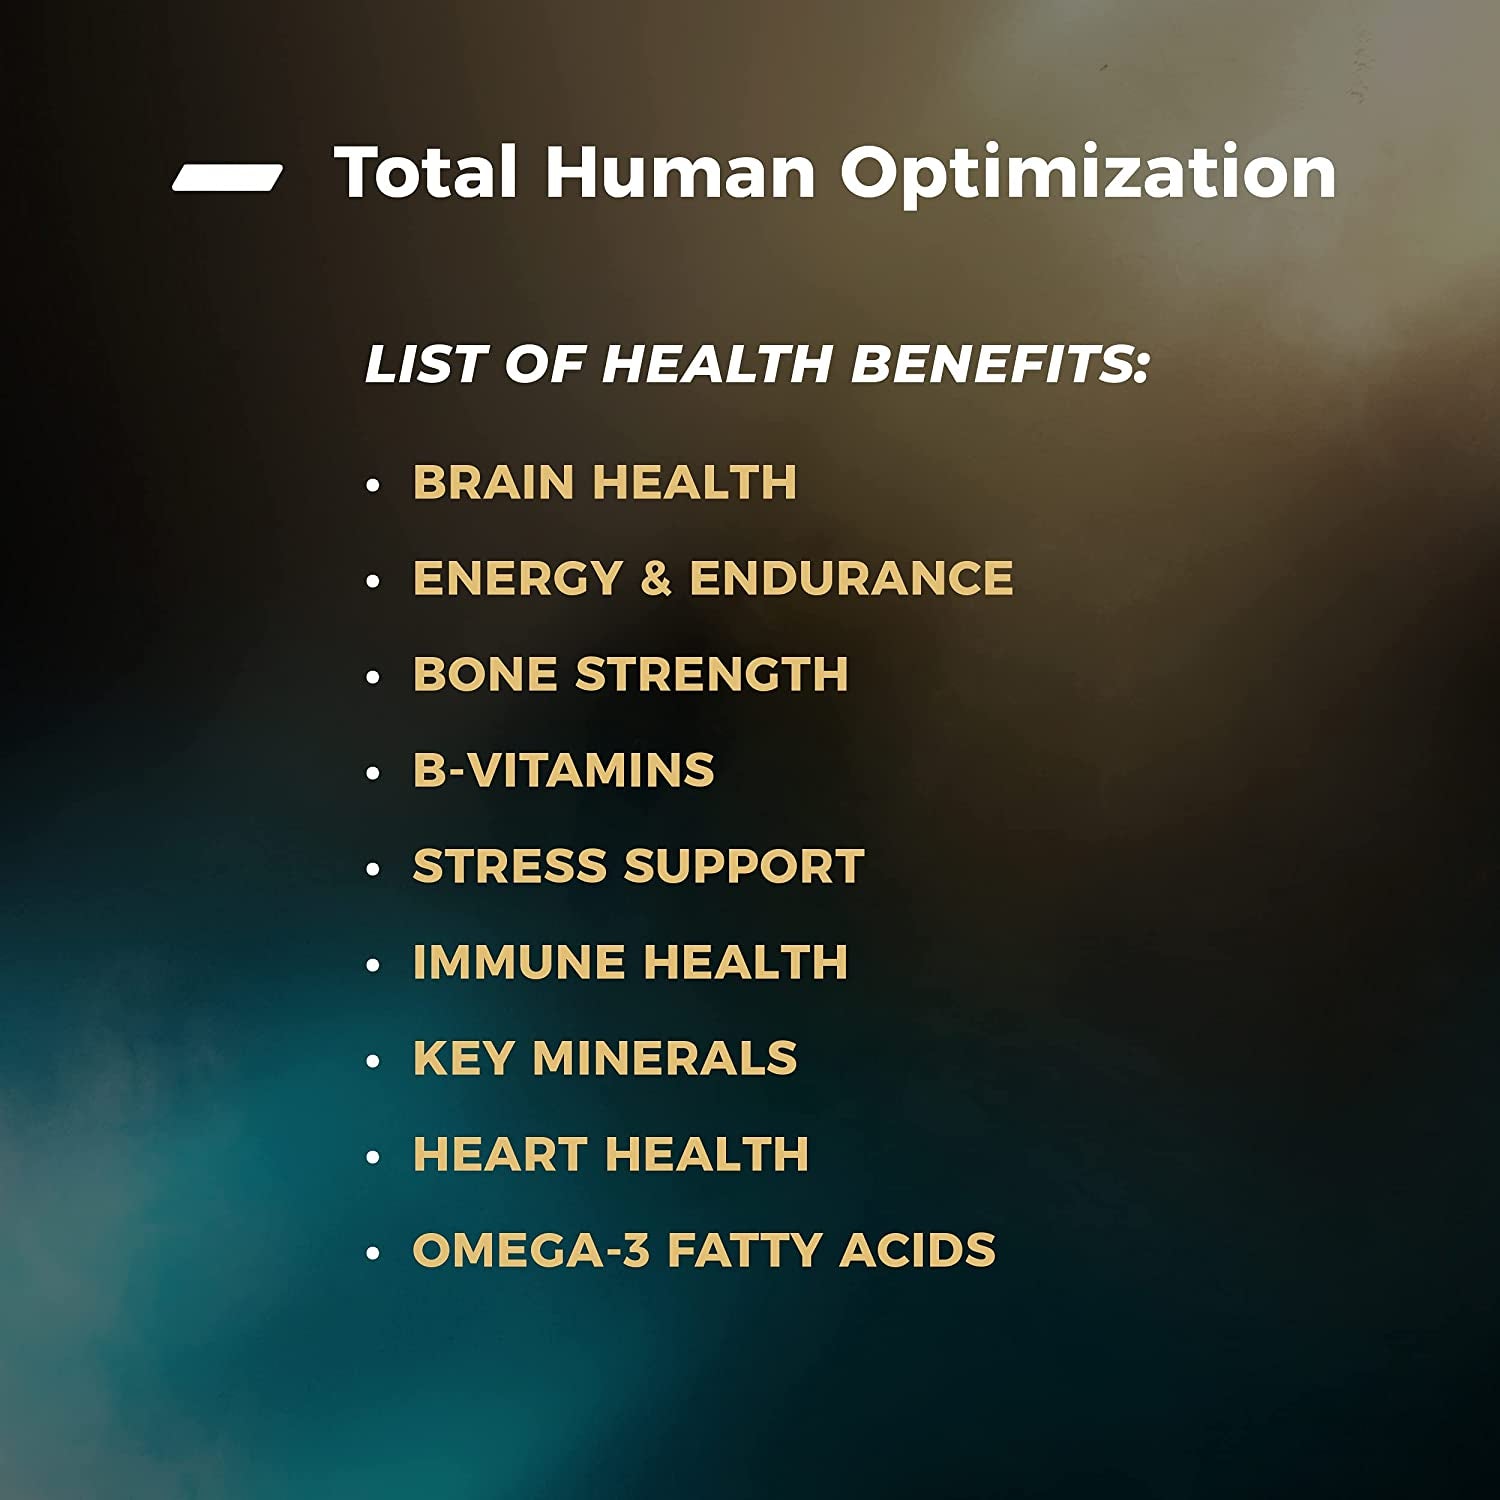 Total Human - Daily Vitamin Packs for Men & Women (60 Pack) - 10X Your Multivitamin - Packed with Essential Vitamins, Minerals, Herbs & Amino Acids